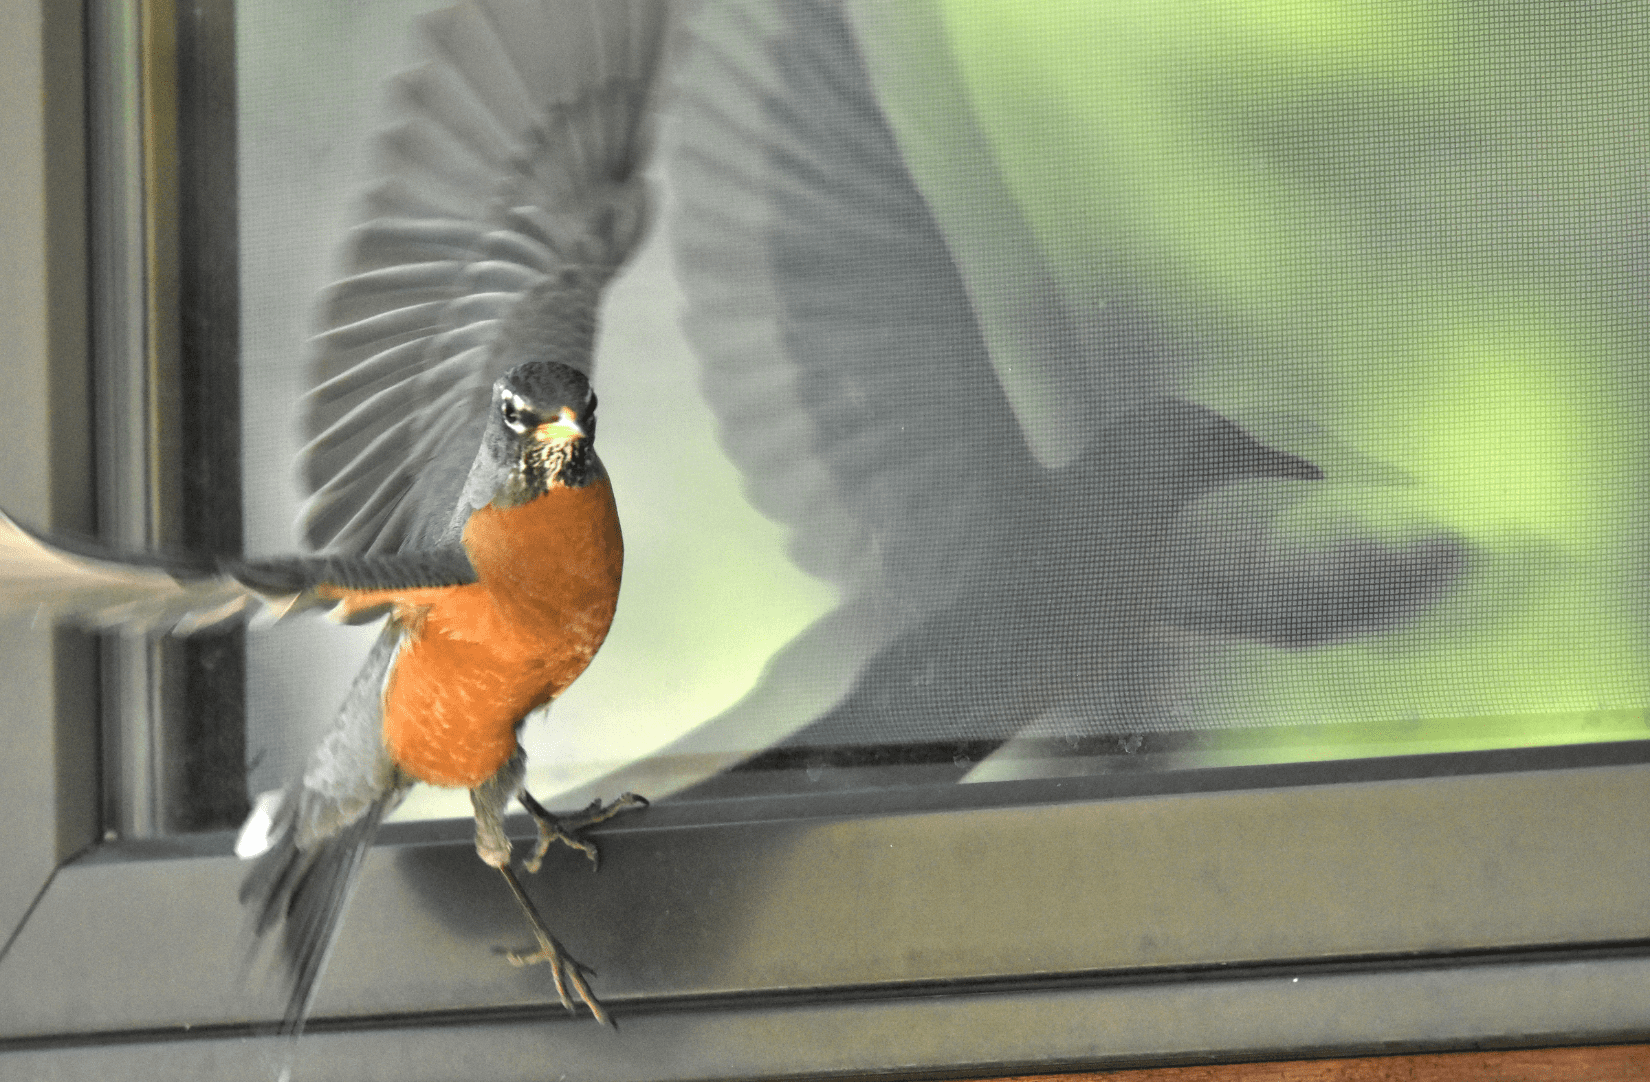 American robin bumping into their own reflection in a window